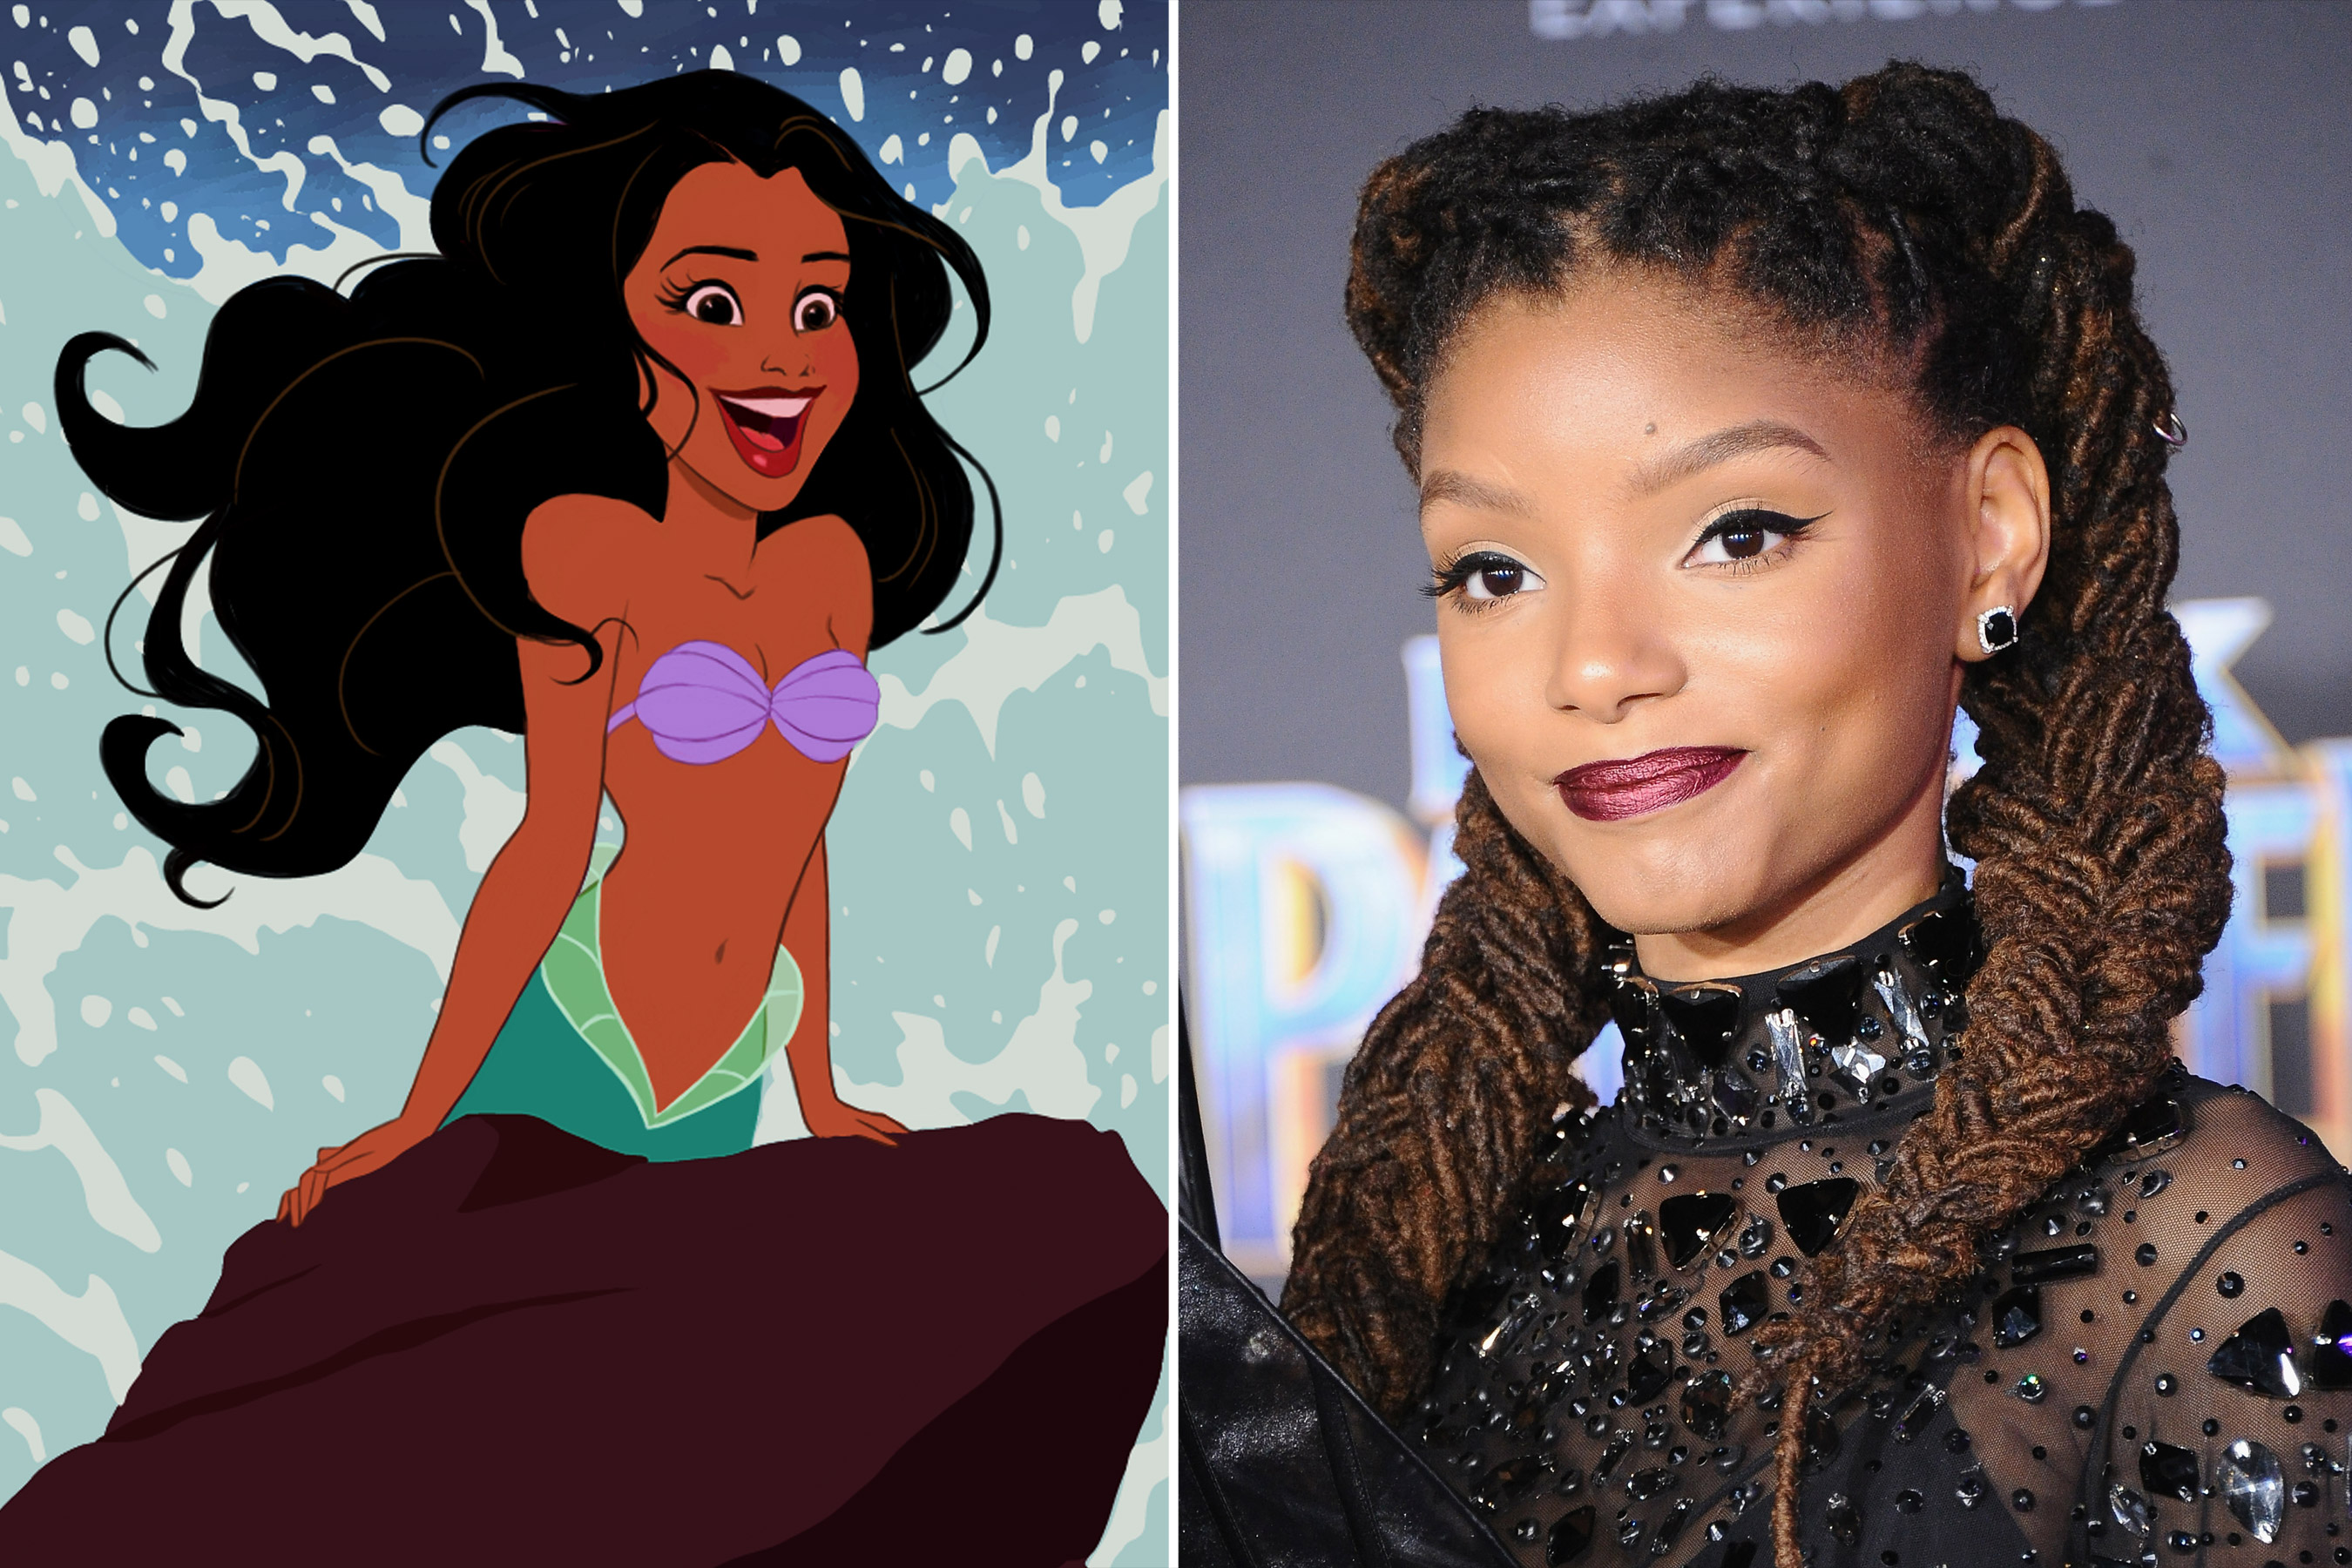 Disney's Freeform calls out critics opposing Halle Bailey's casting as Ariel